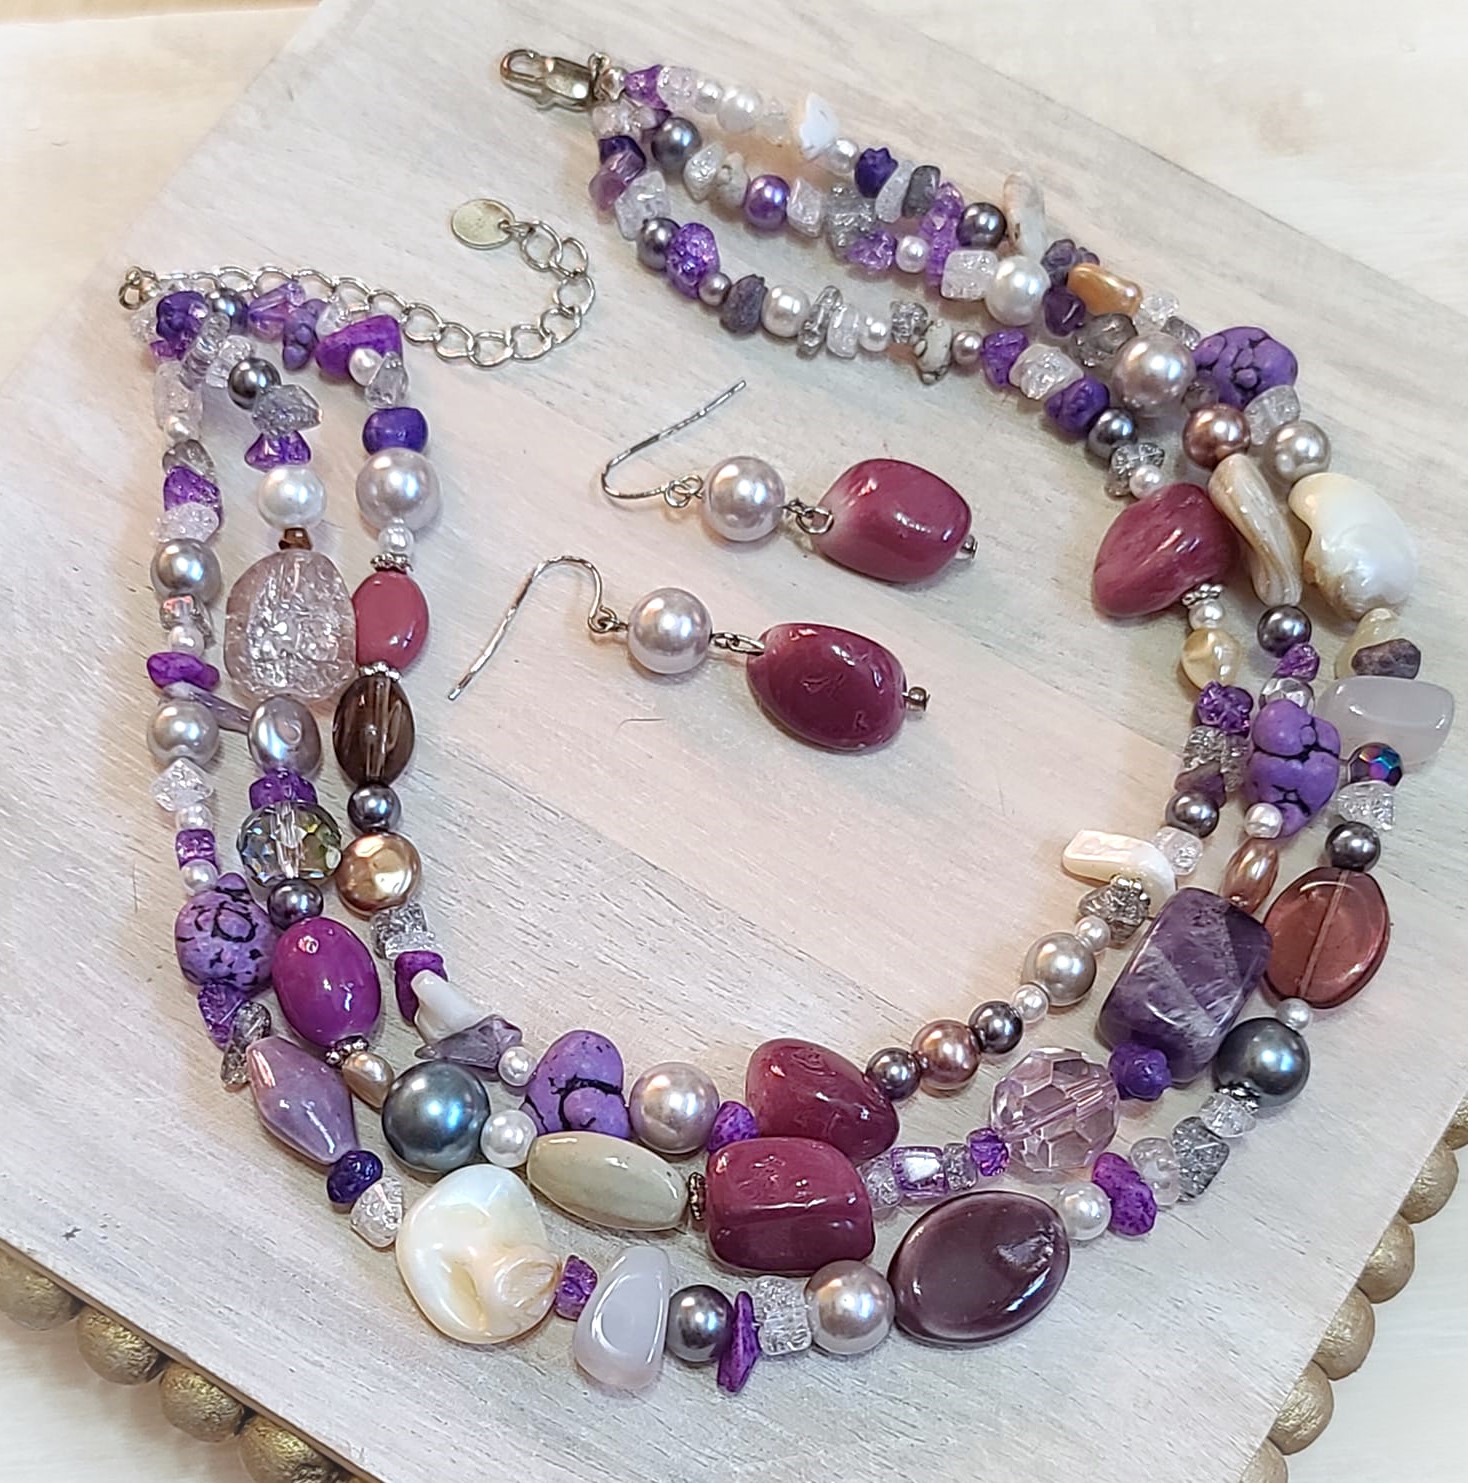 3 strand amethyst, glass and pearl gem necklace and earrings